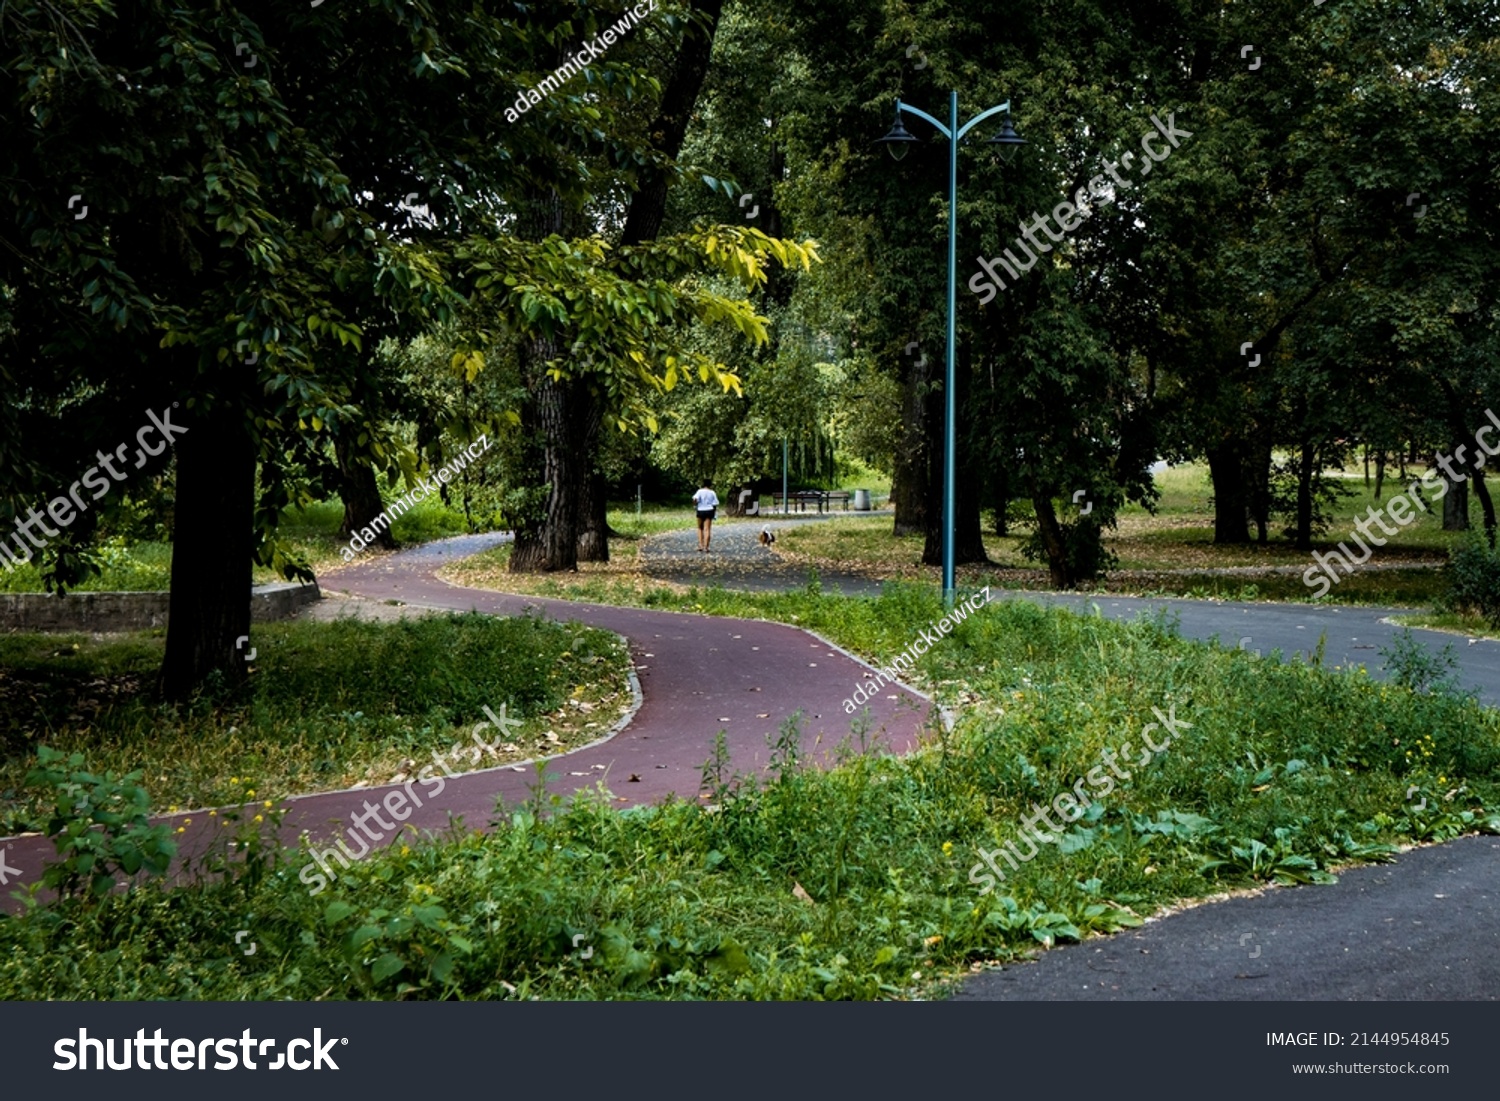 Asphalt footpath and bicycle path surrounded by lawn and trees at the city park #2144954845